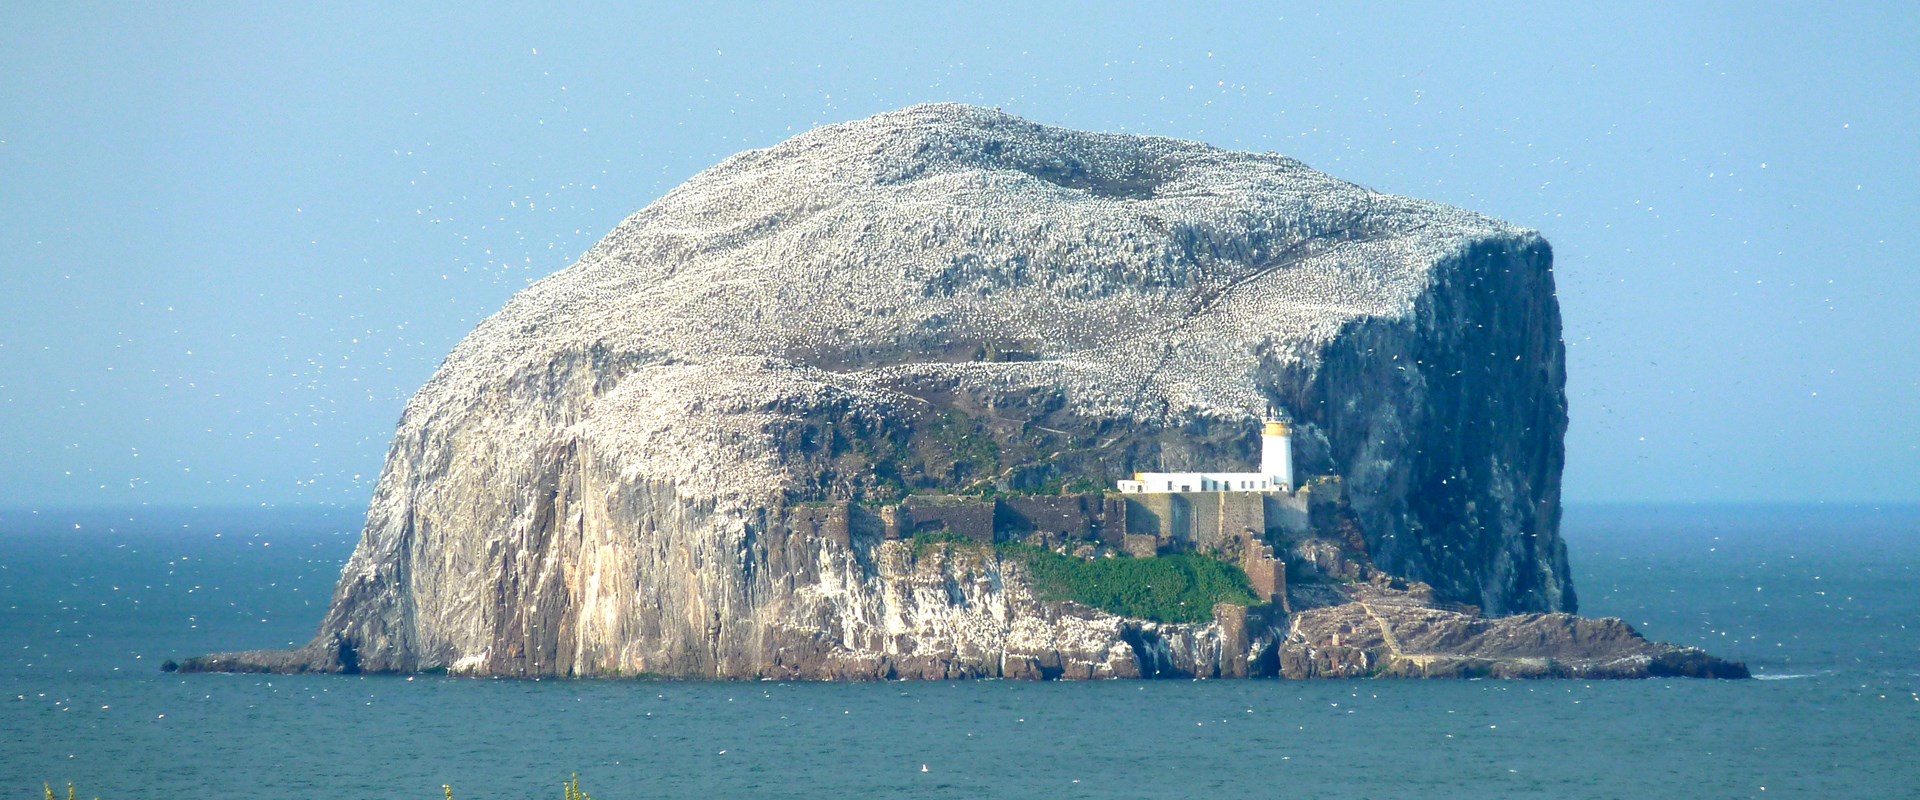 A massive dome of rock rises out of a calm sea. A white lighthouse is on the rock, as are thousands of nesting birds.